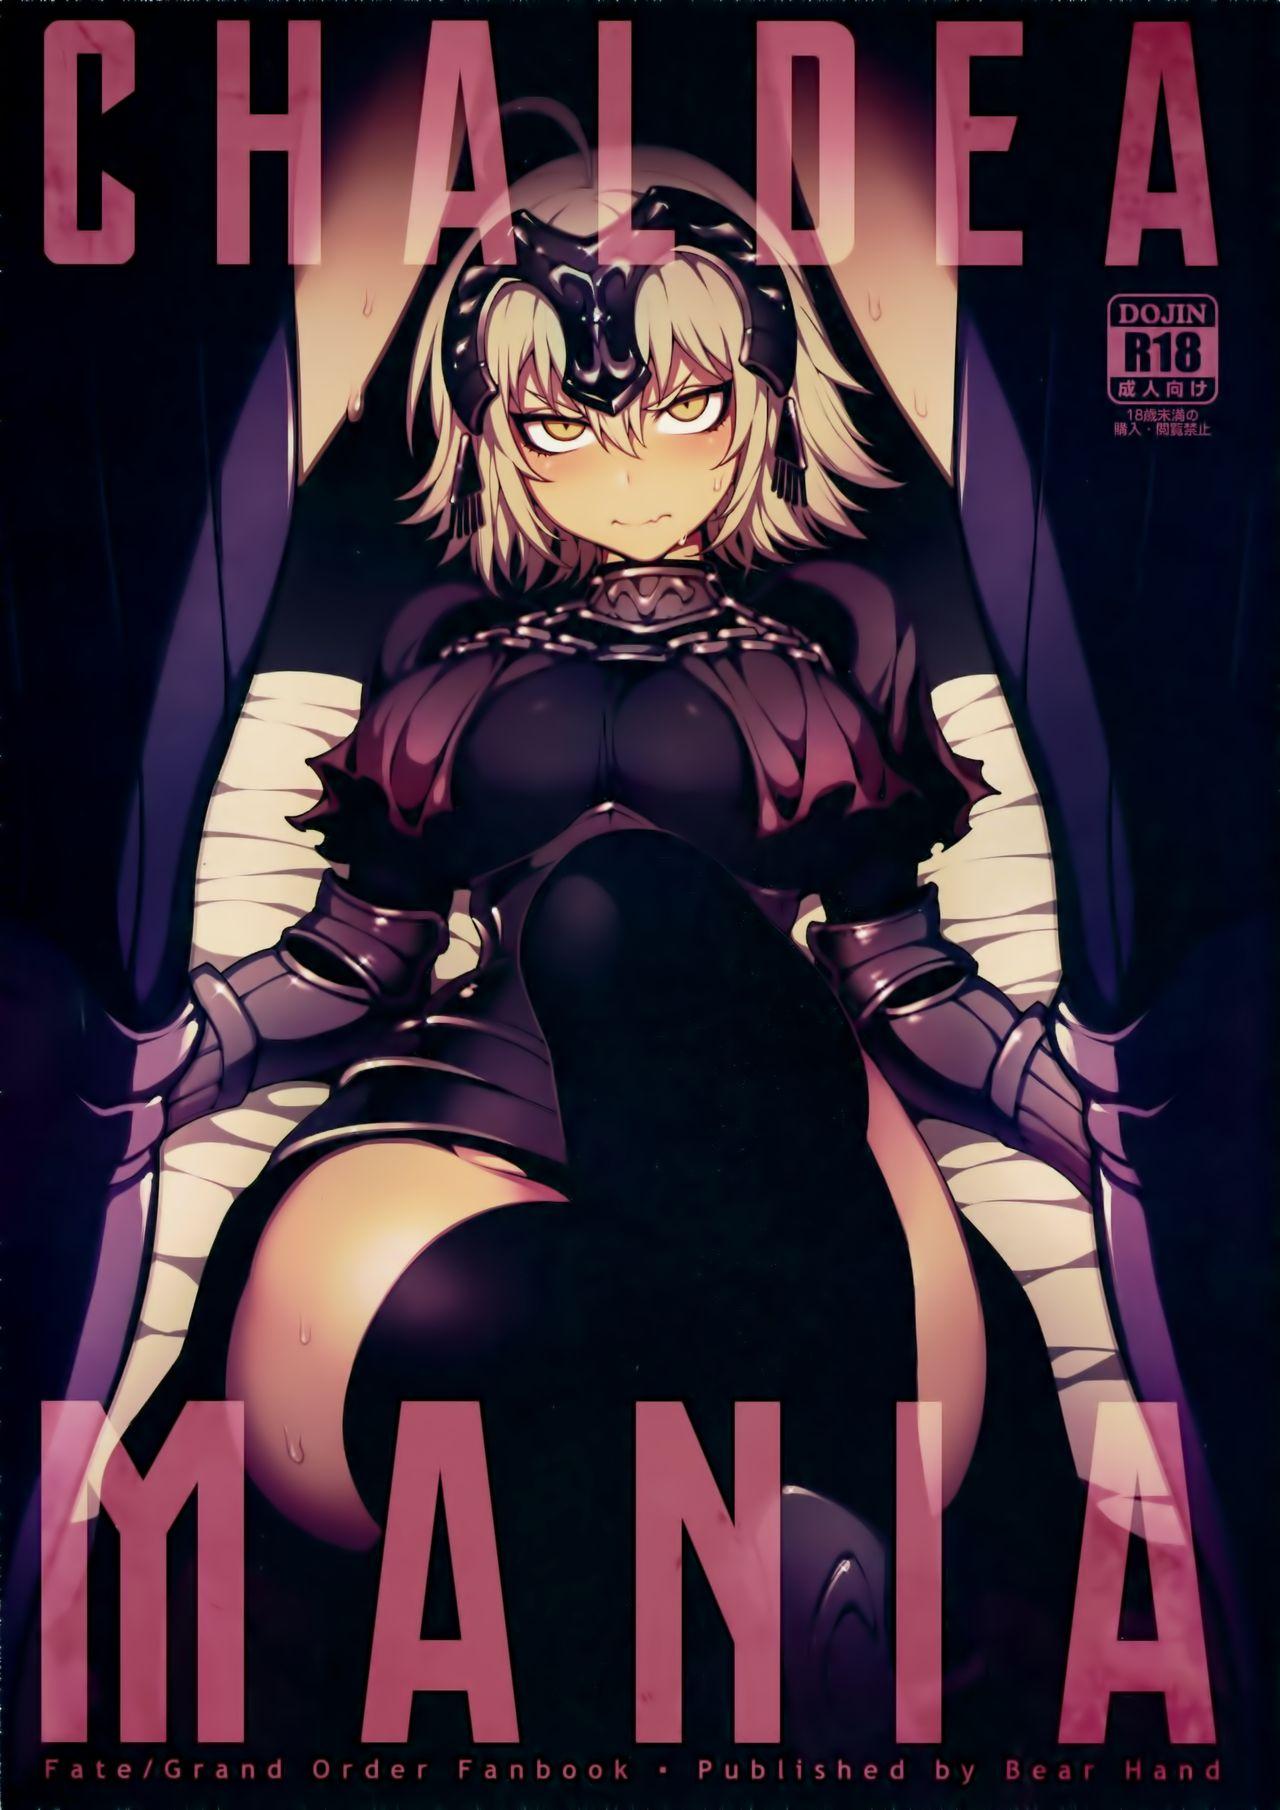 Scandal CHALDEA MANIA - Jeanne Alter - Fate grand order Footjob - Page 1